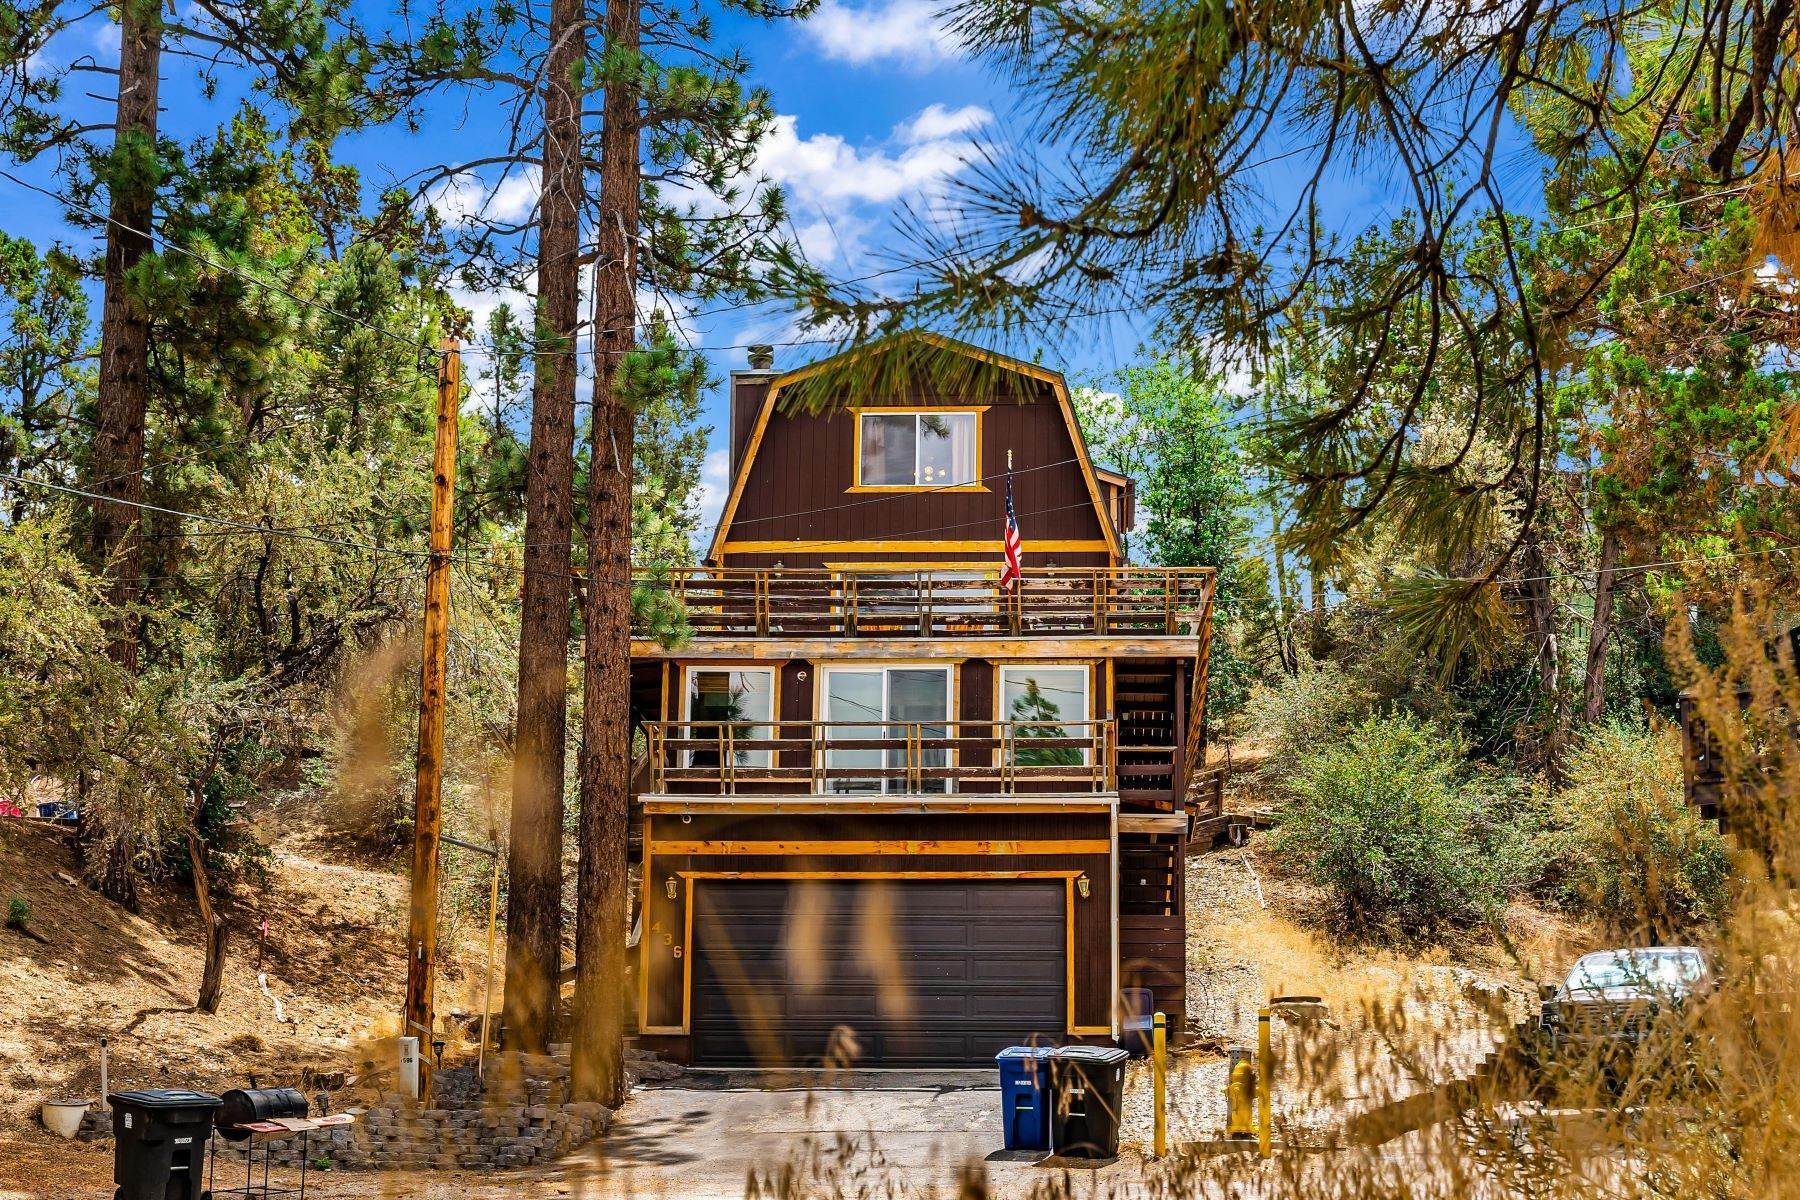 Single Family Homes for Sale at 436 Sheridan Drive, Big Bear, CA 92314 436 Sheridan Drive Big Bear, California 92314 United States